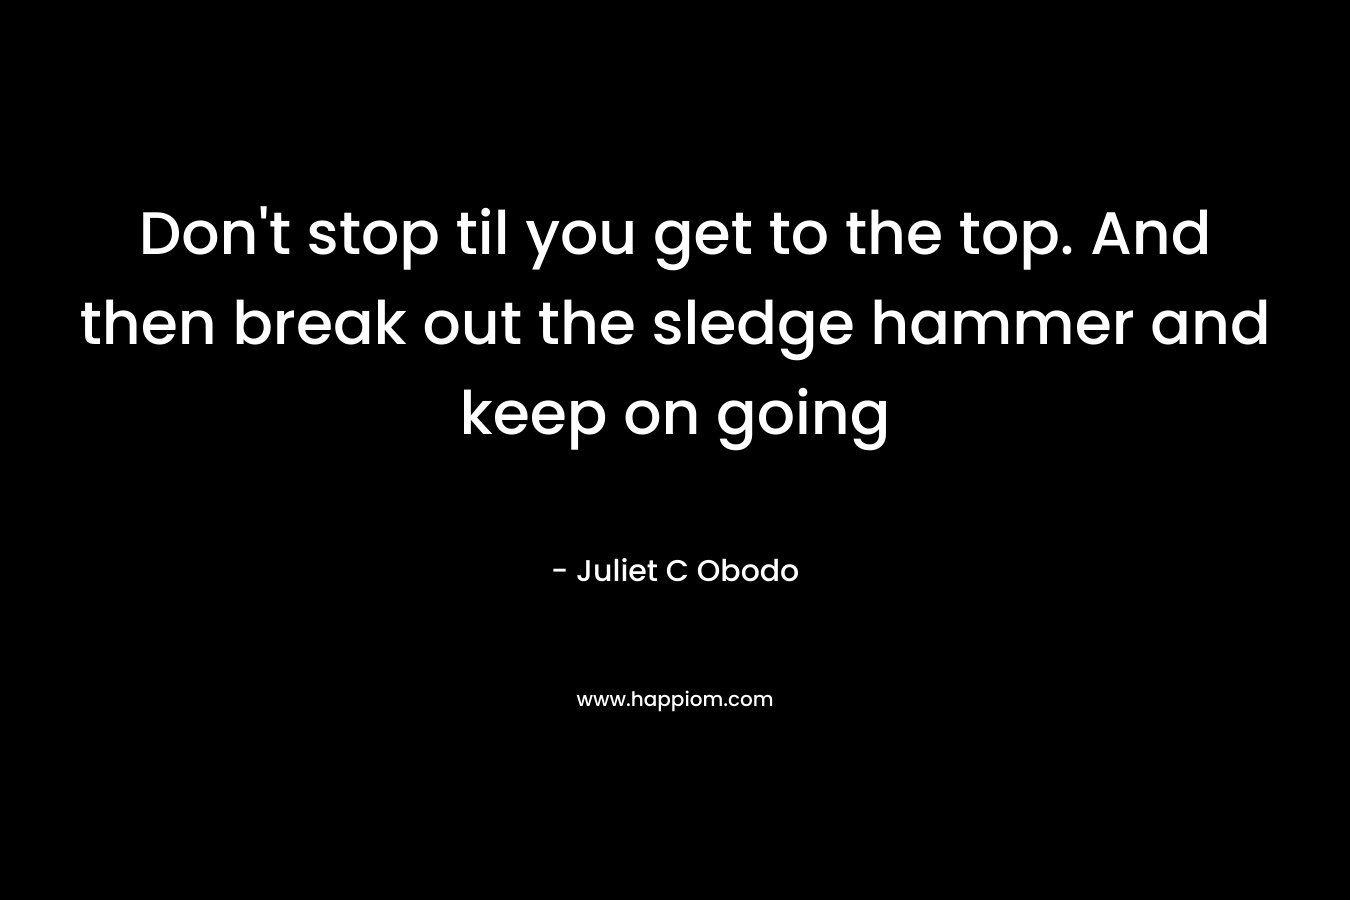 Don’t stop til you get to the top. And then break out the sledge hammer and keep on going – Juliet C Obodo